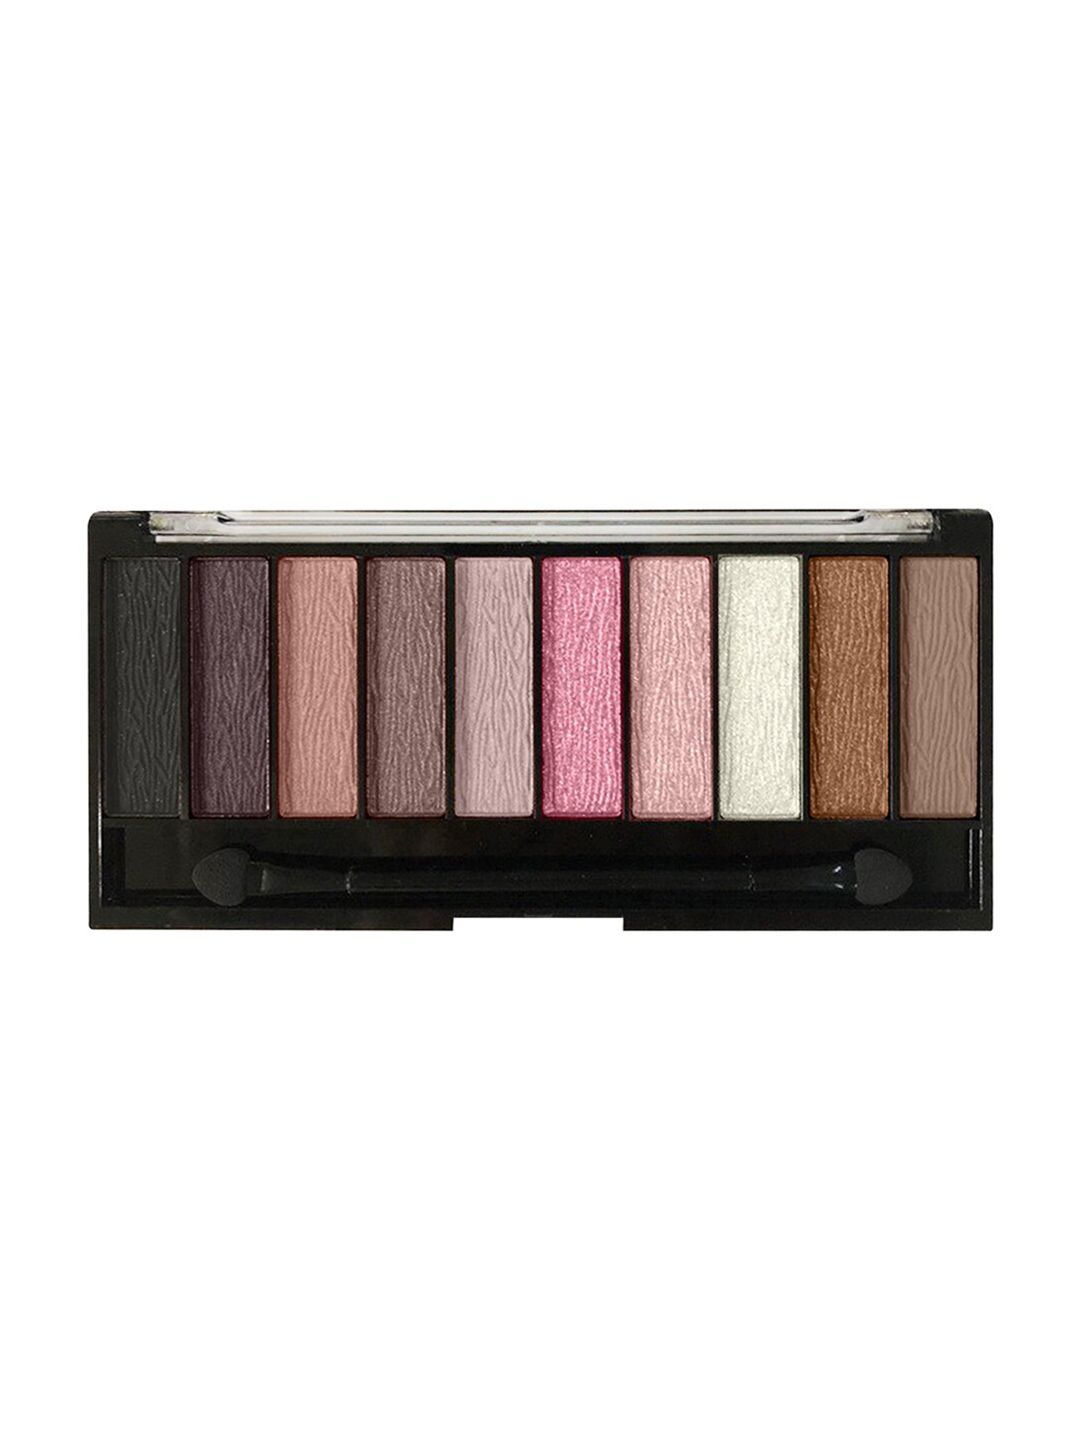 Sivanna Colors Pro Eyeshadow Palette - HF537 02 Price in India